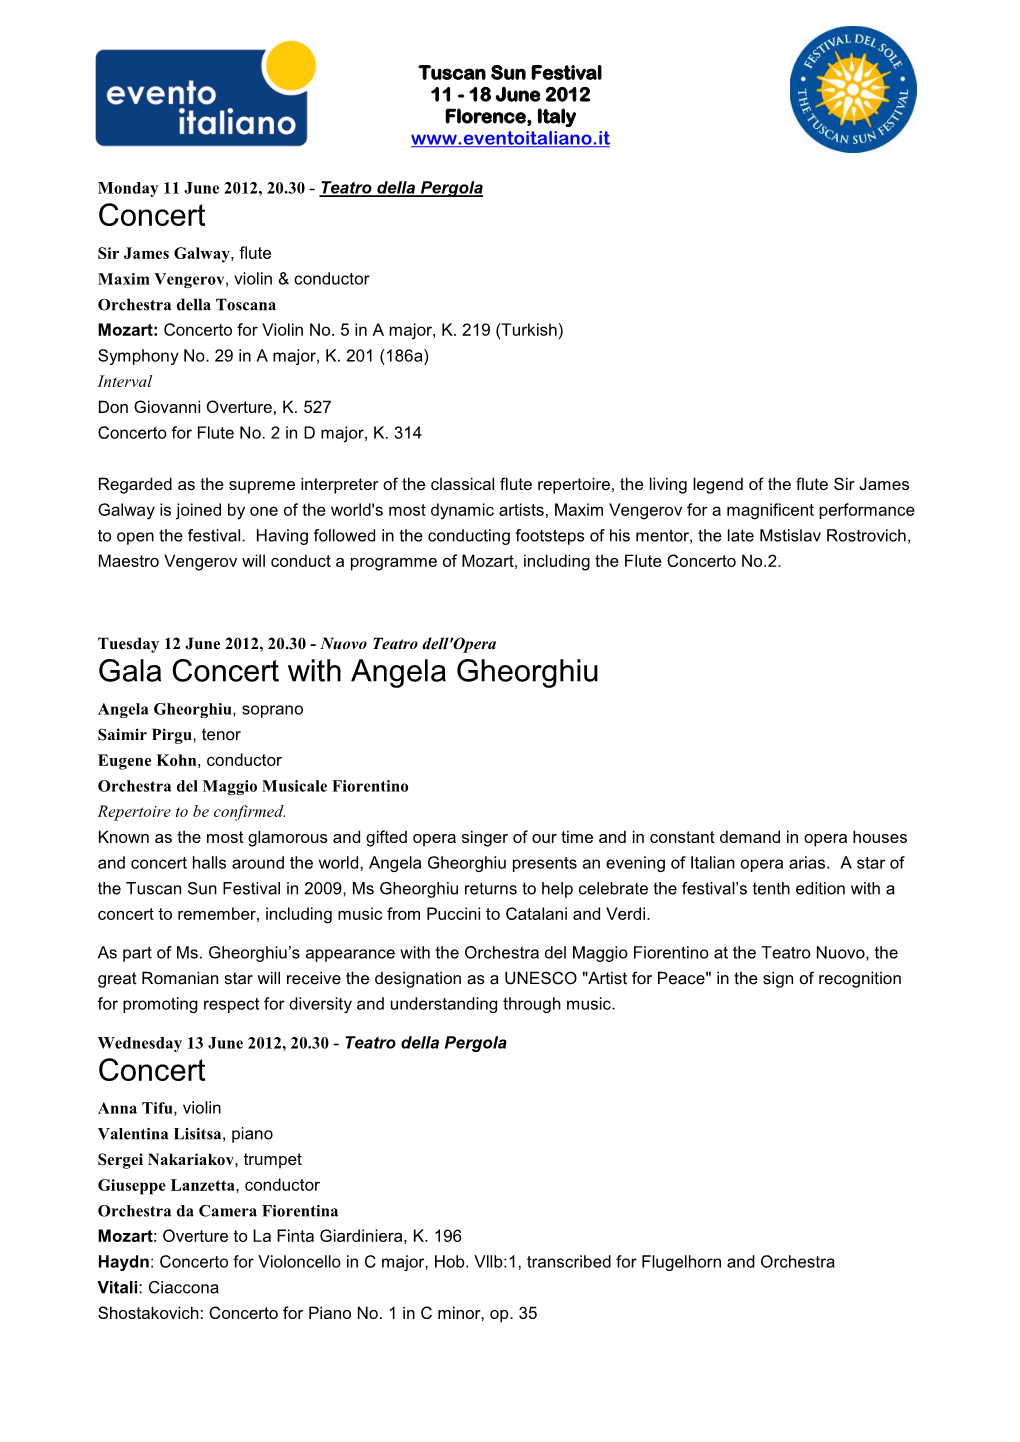 Concert Gala Concert with Angela Gheorghiu Concert